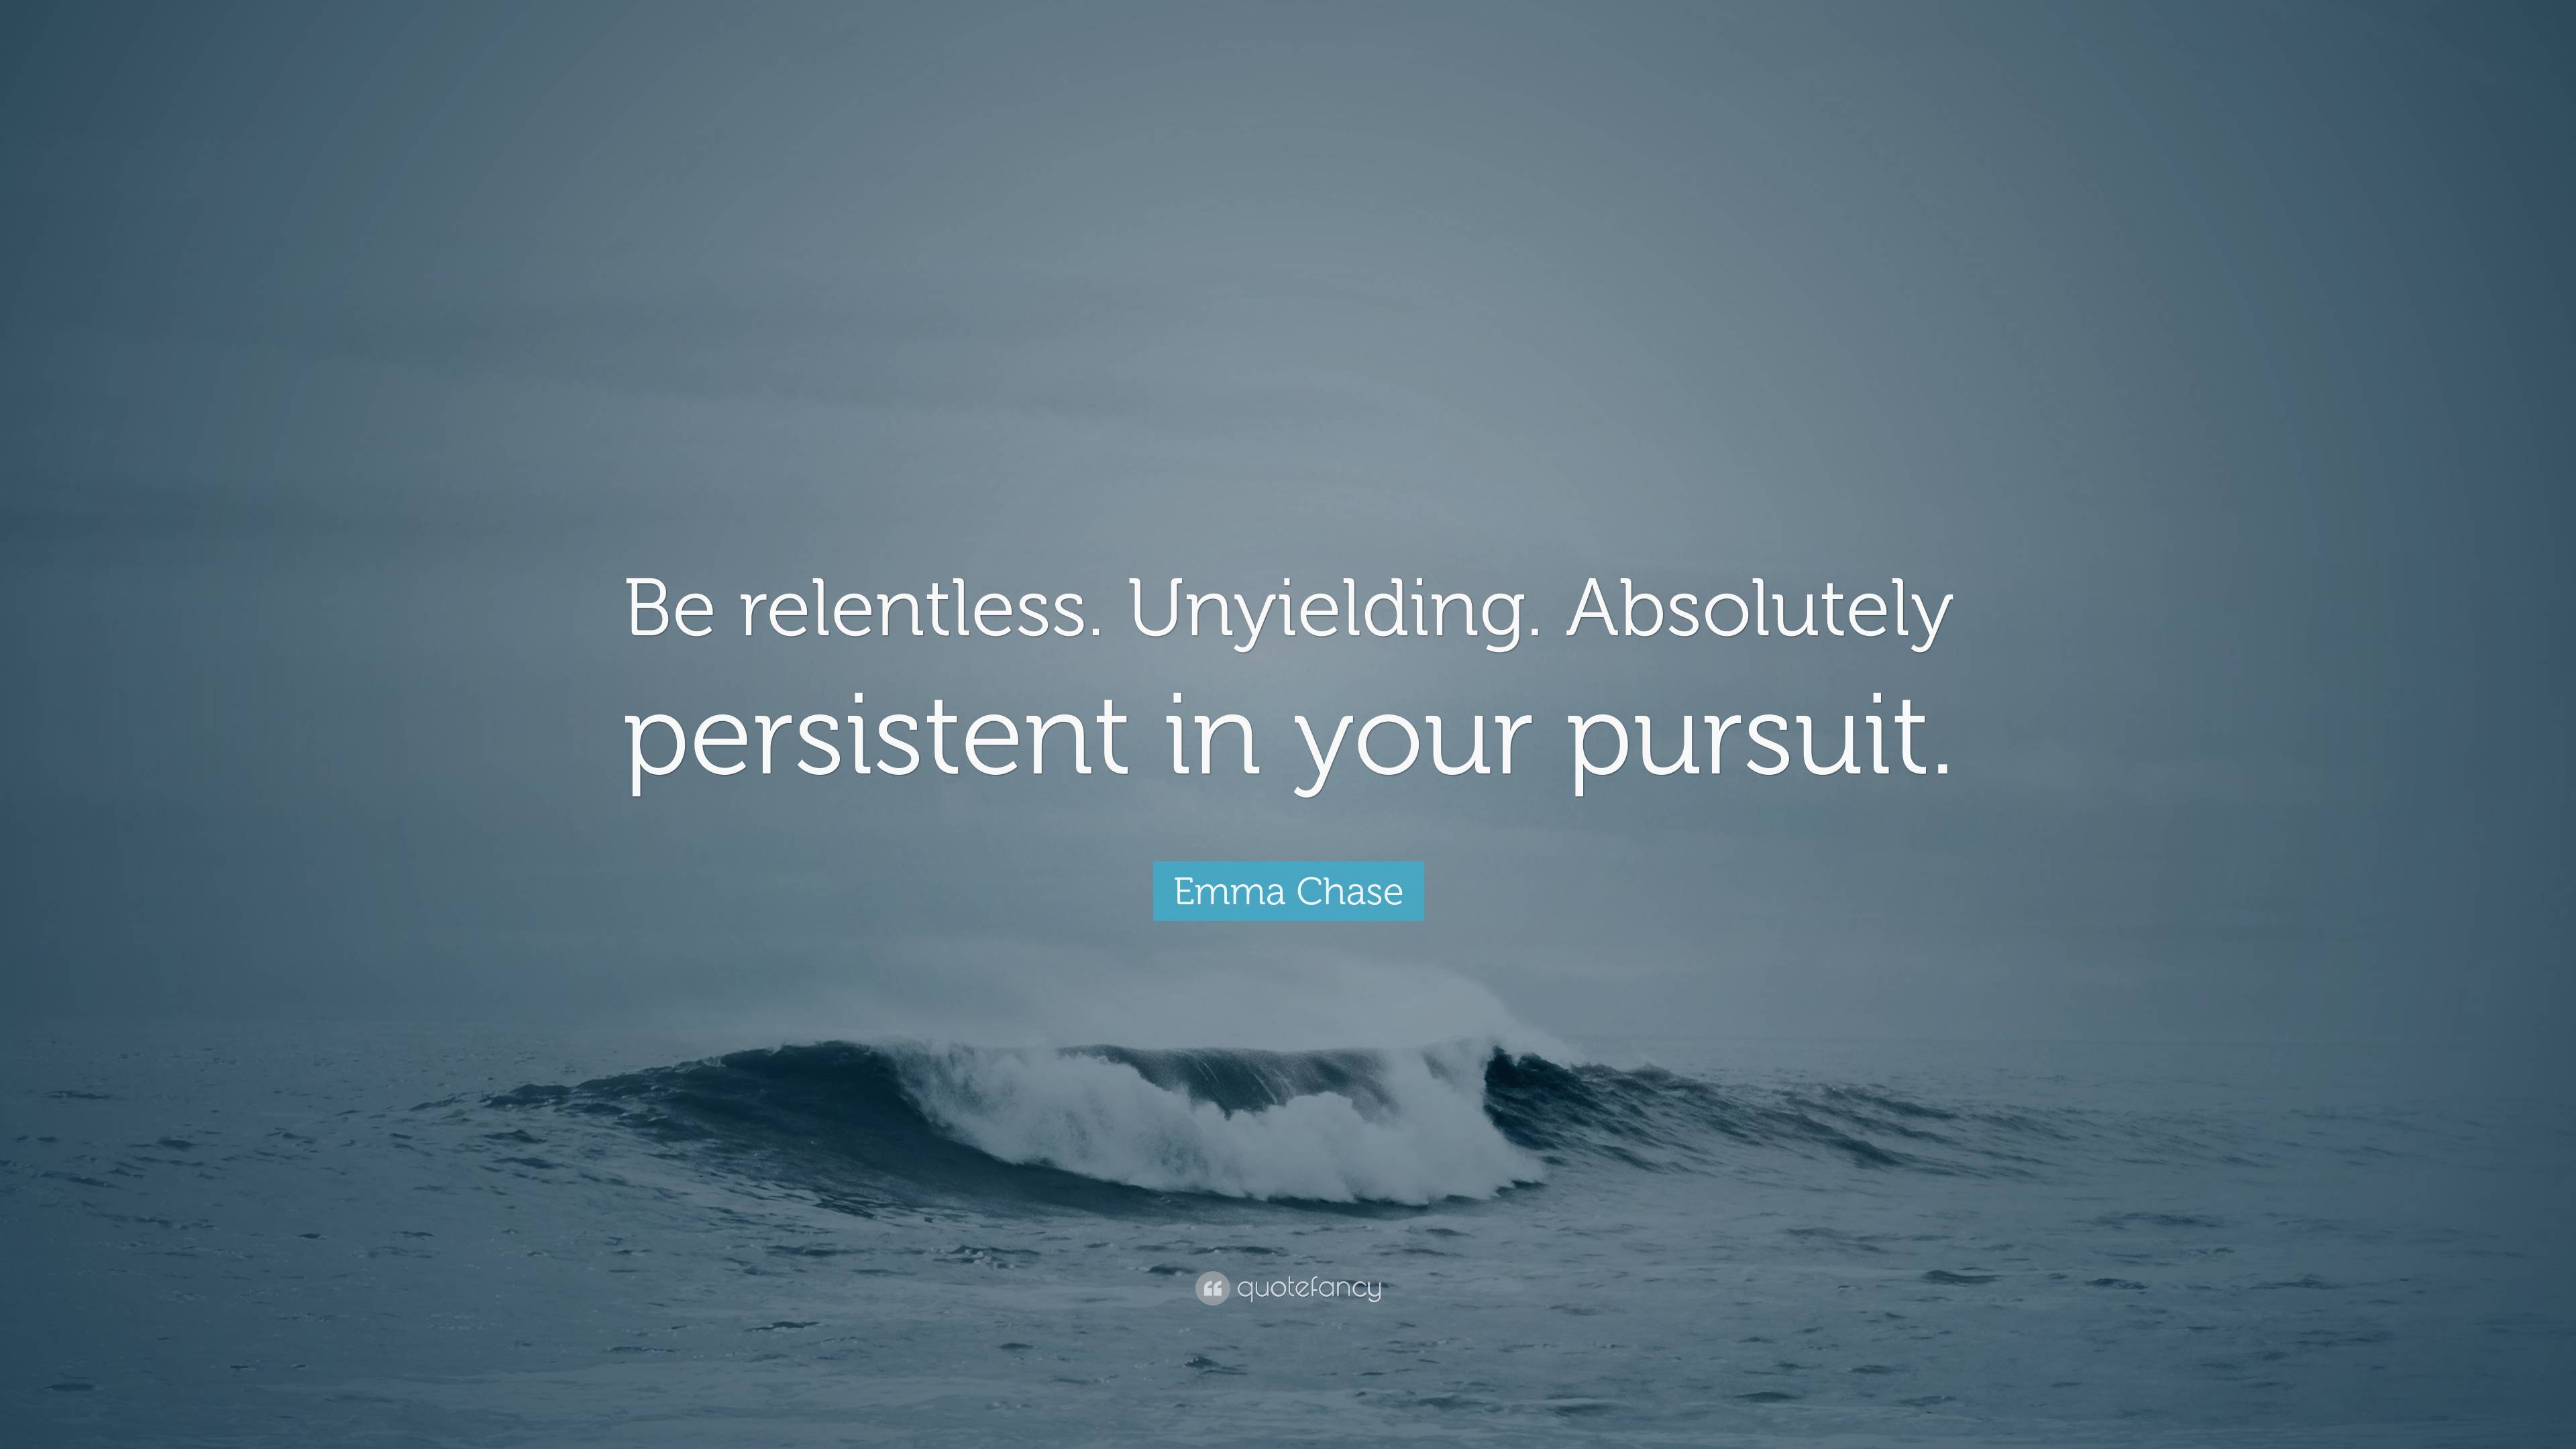 Emma Chase Quote: “Be relentless. Unyielding. Absolutely persistent in ...